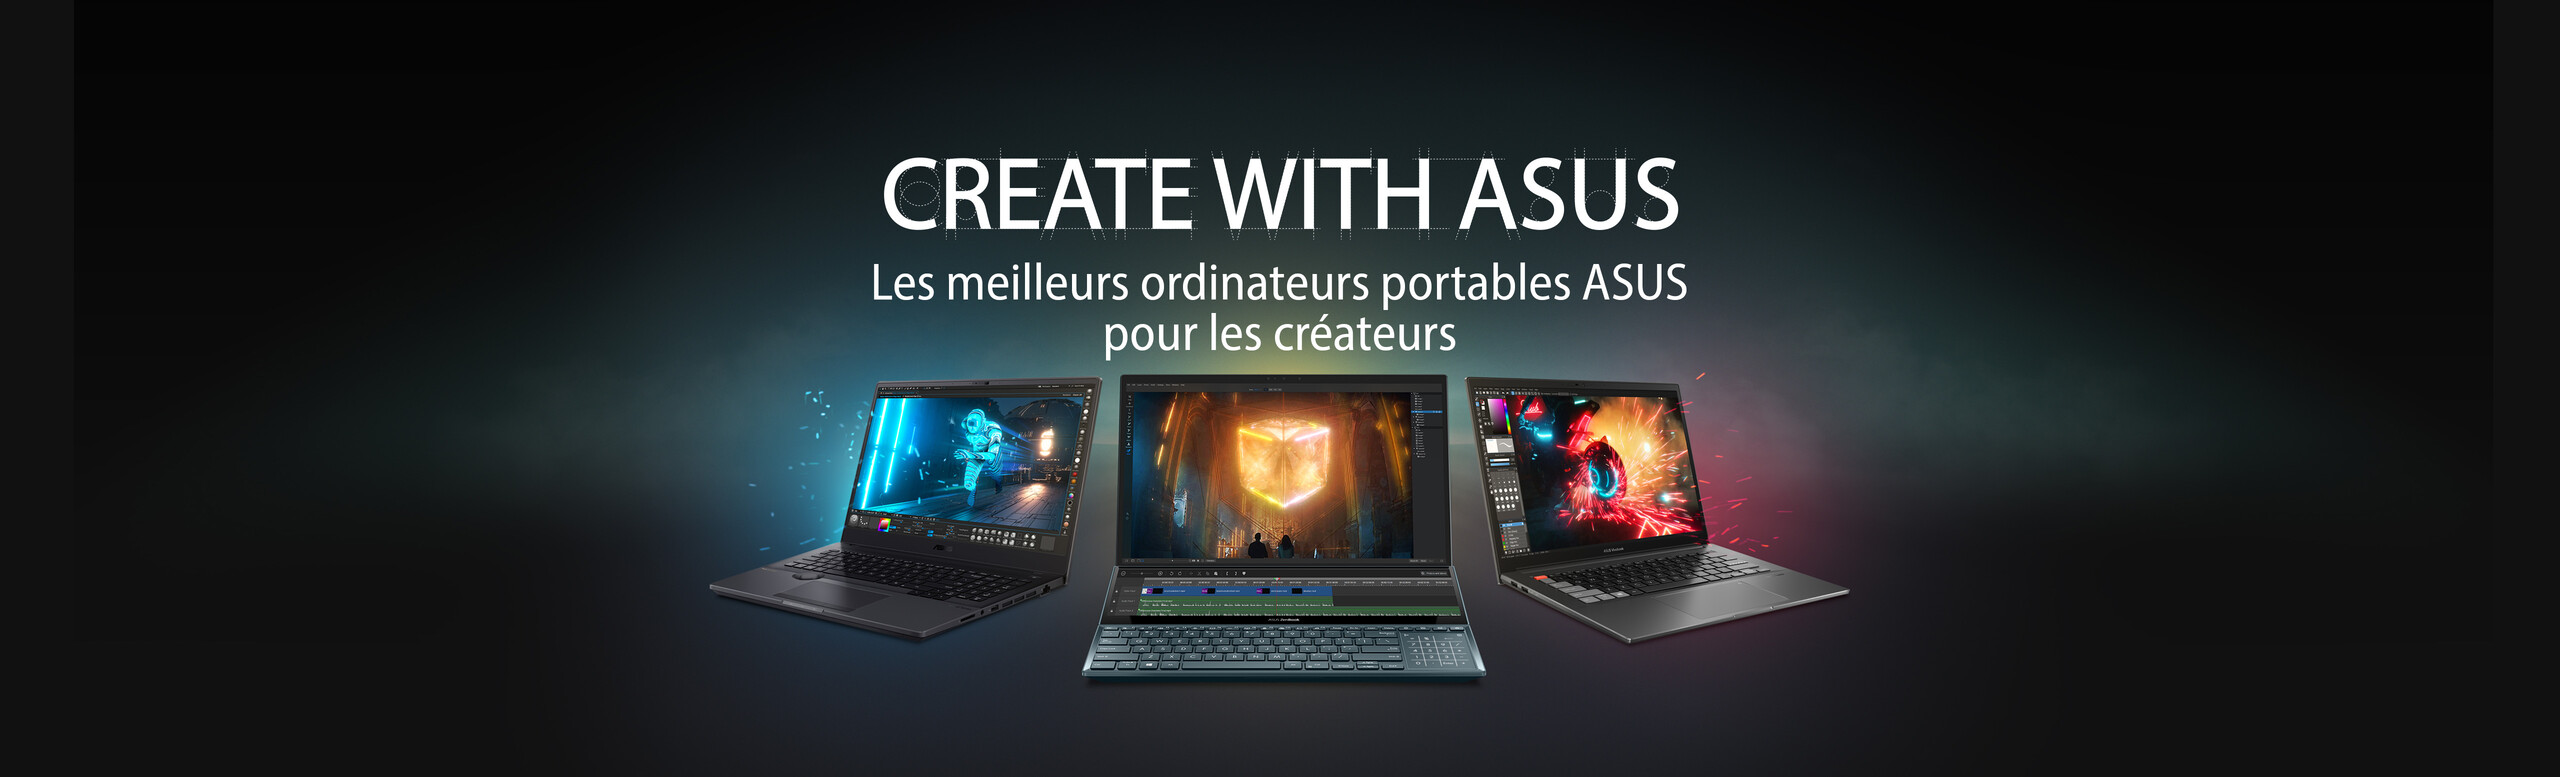 create with asus